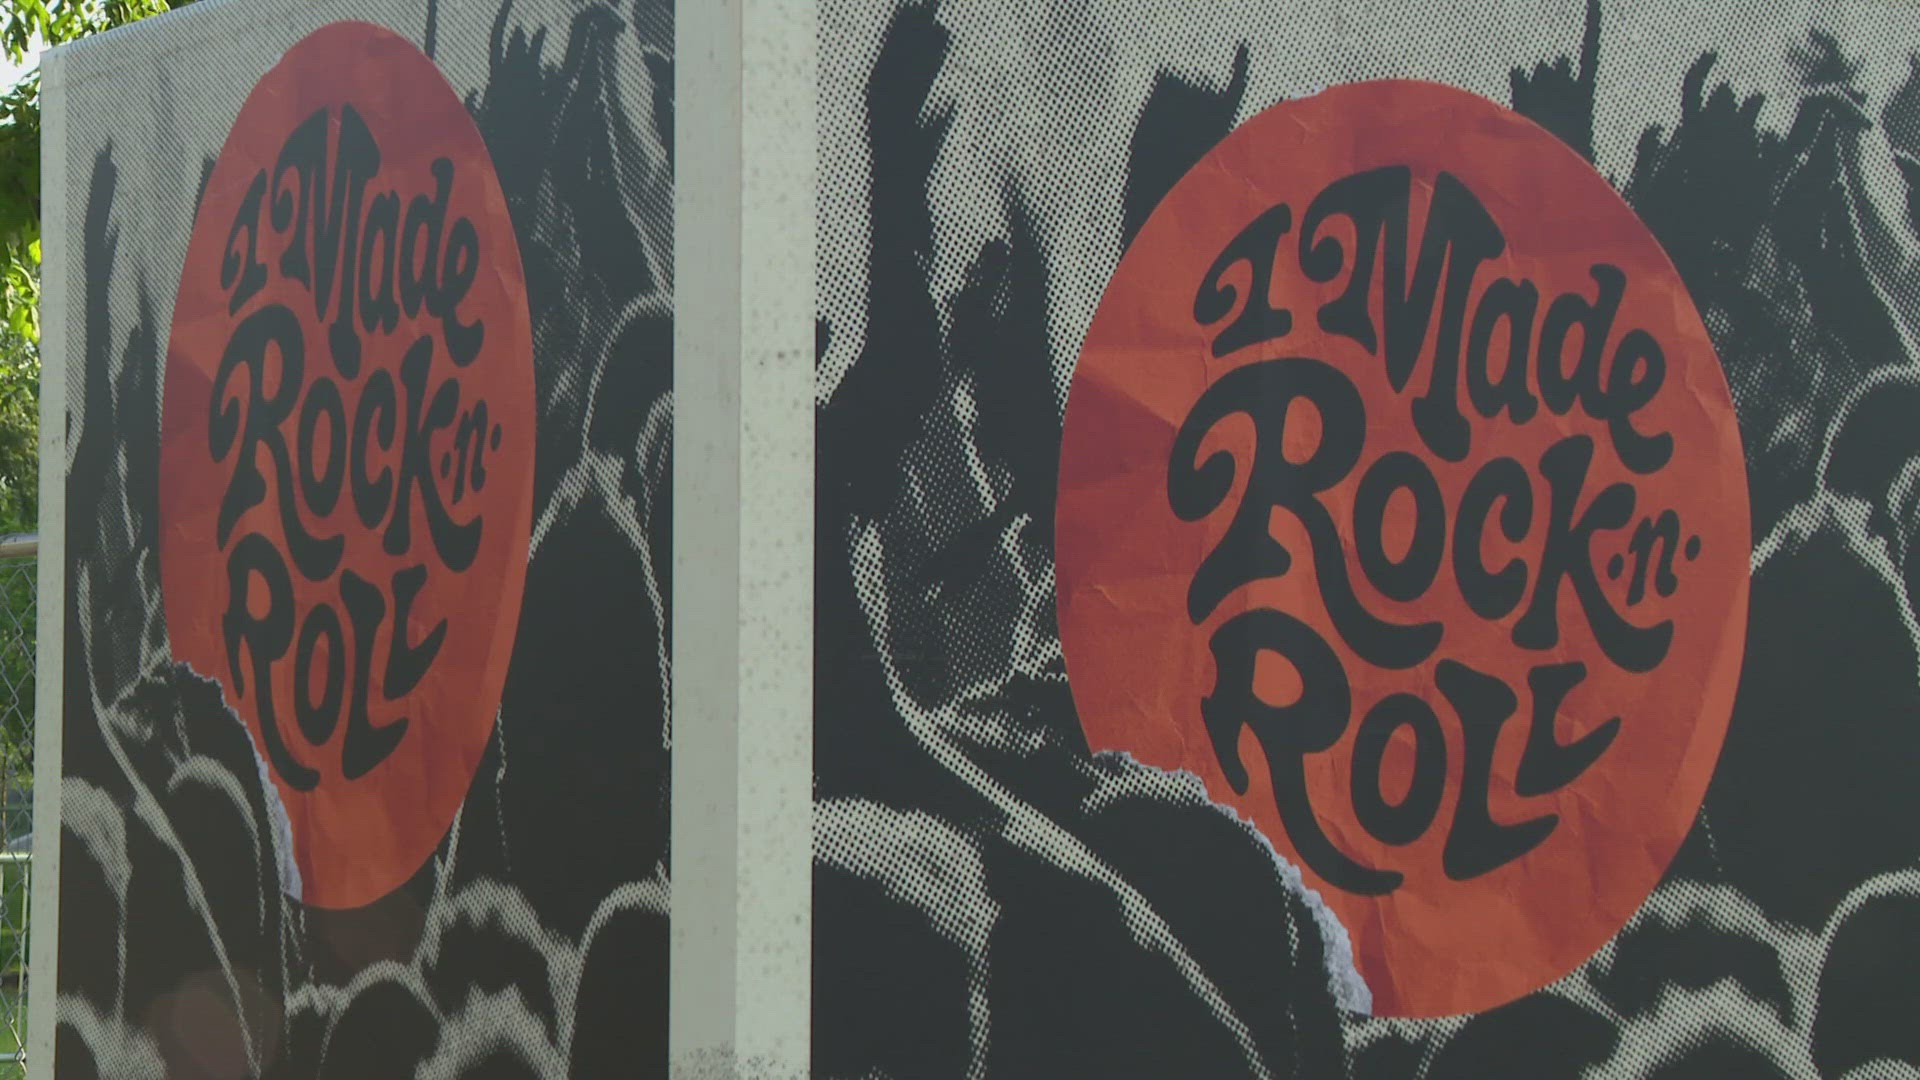 The festival will highlight Black artists who helped shape rock and roll.